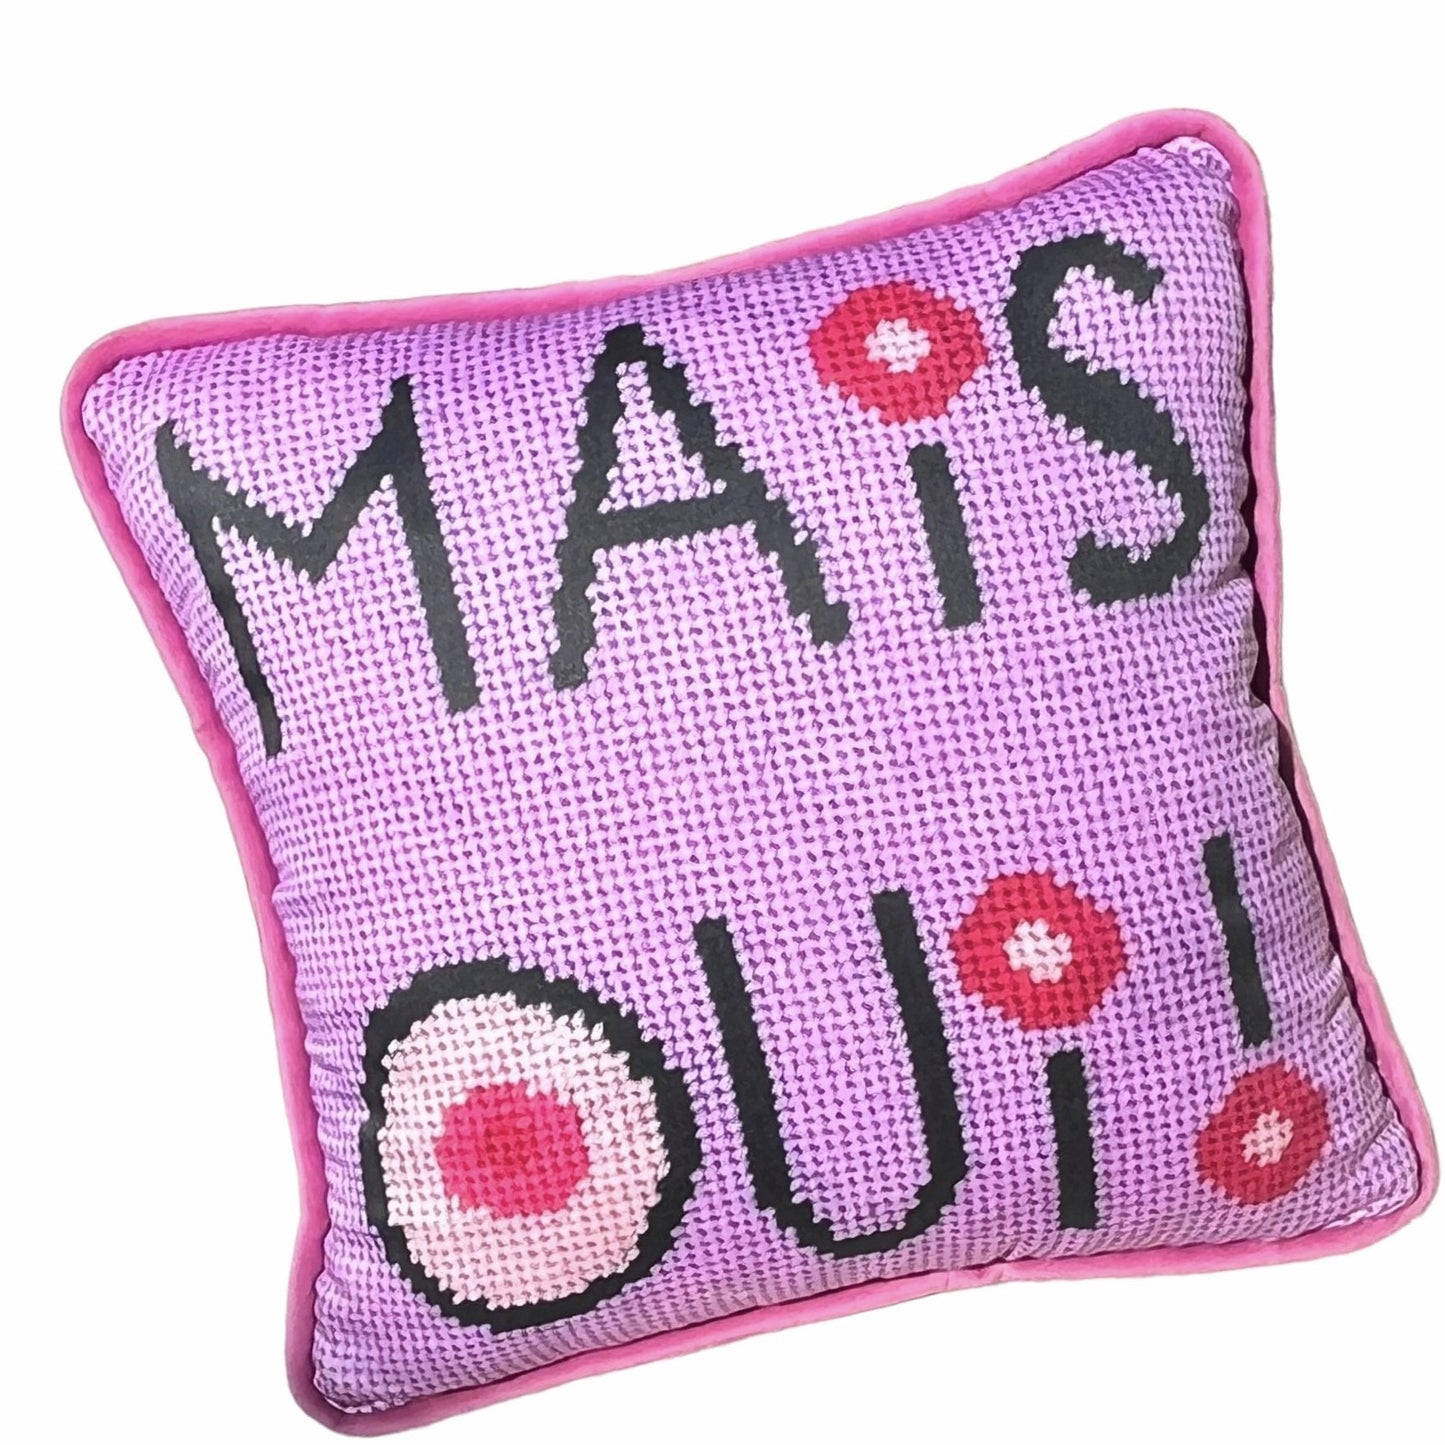 mais oui black stacked text with I dot and O that have cream colored centers with pink circles. Lavender pink background